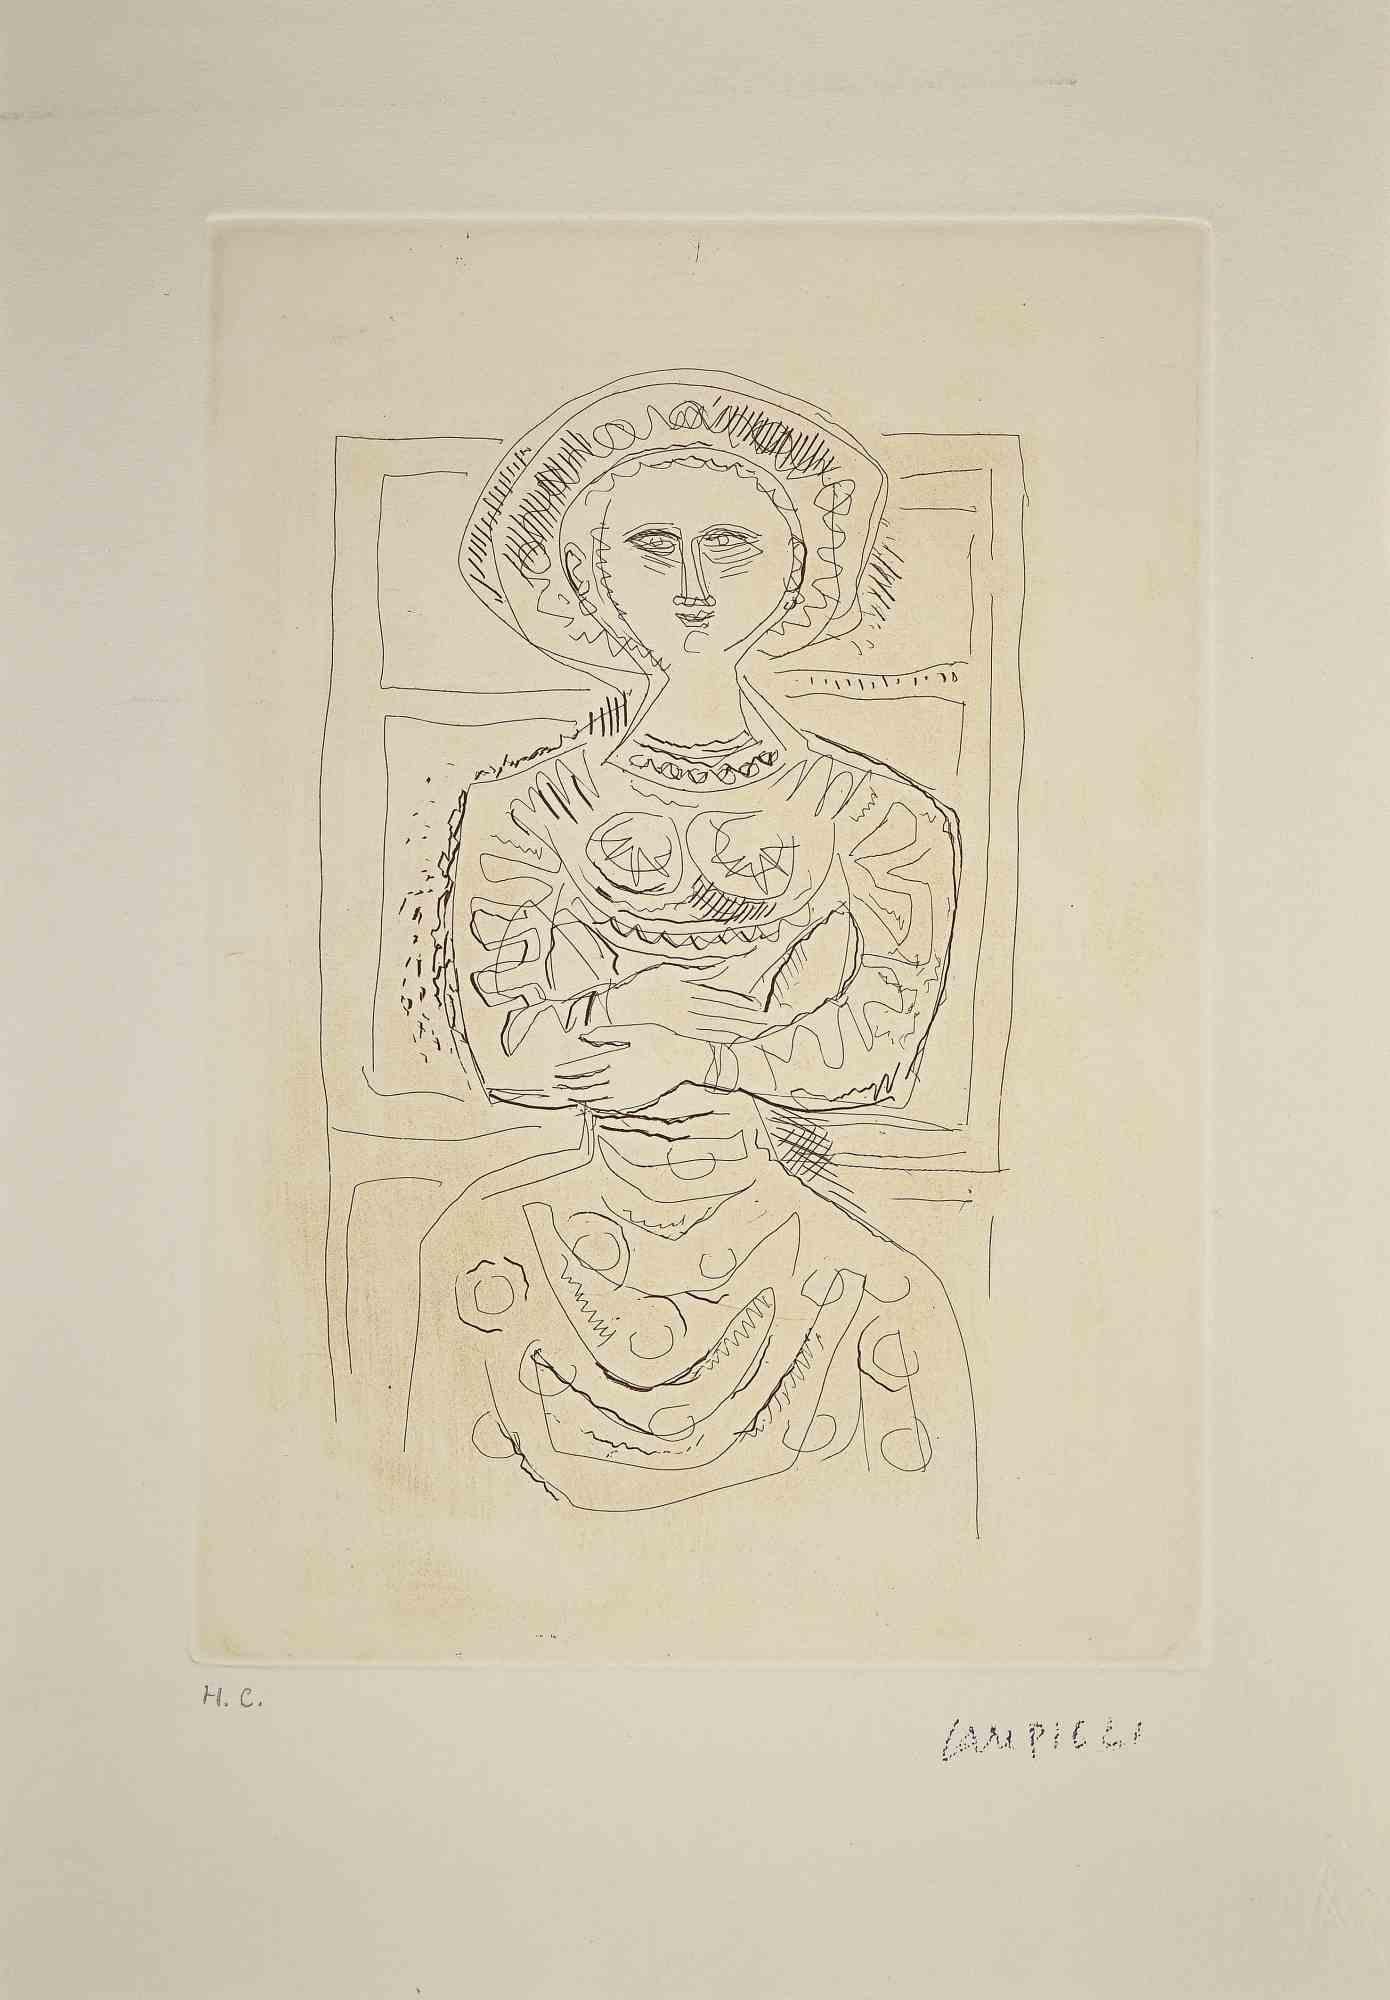 The Idol is an original print realized by Massimo Campigli in the 1970/1971.

Etching on paper.

This artwork it is part of a series of works created in the last period of the artist and printed at the turn of the year of his death, which took place